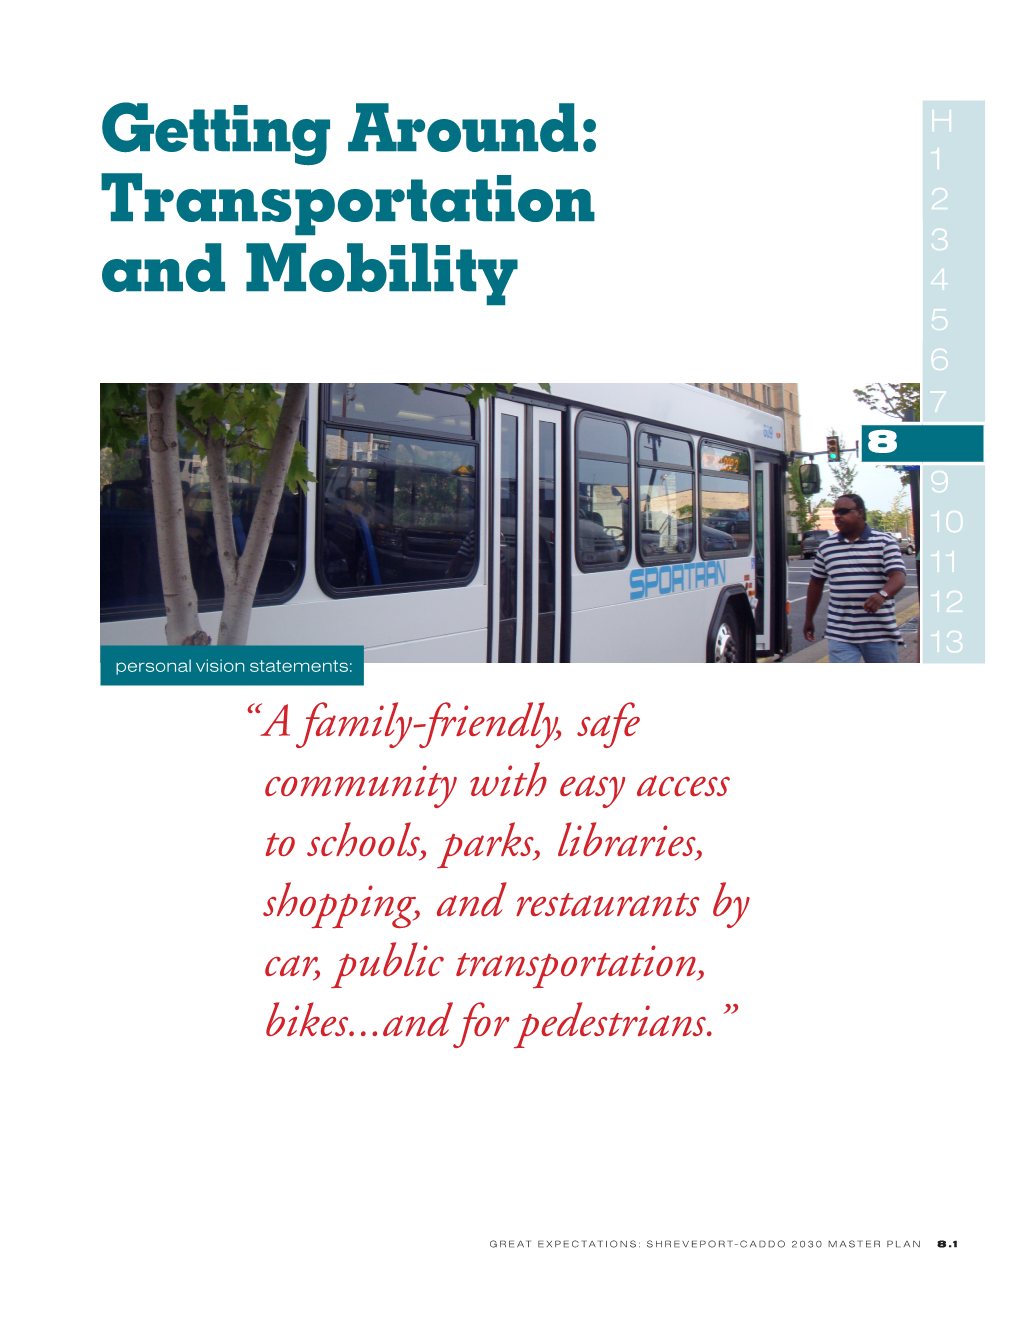 Getting Around: Transportation and Mobility